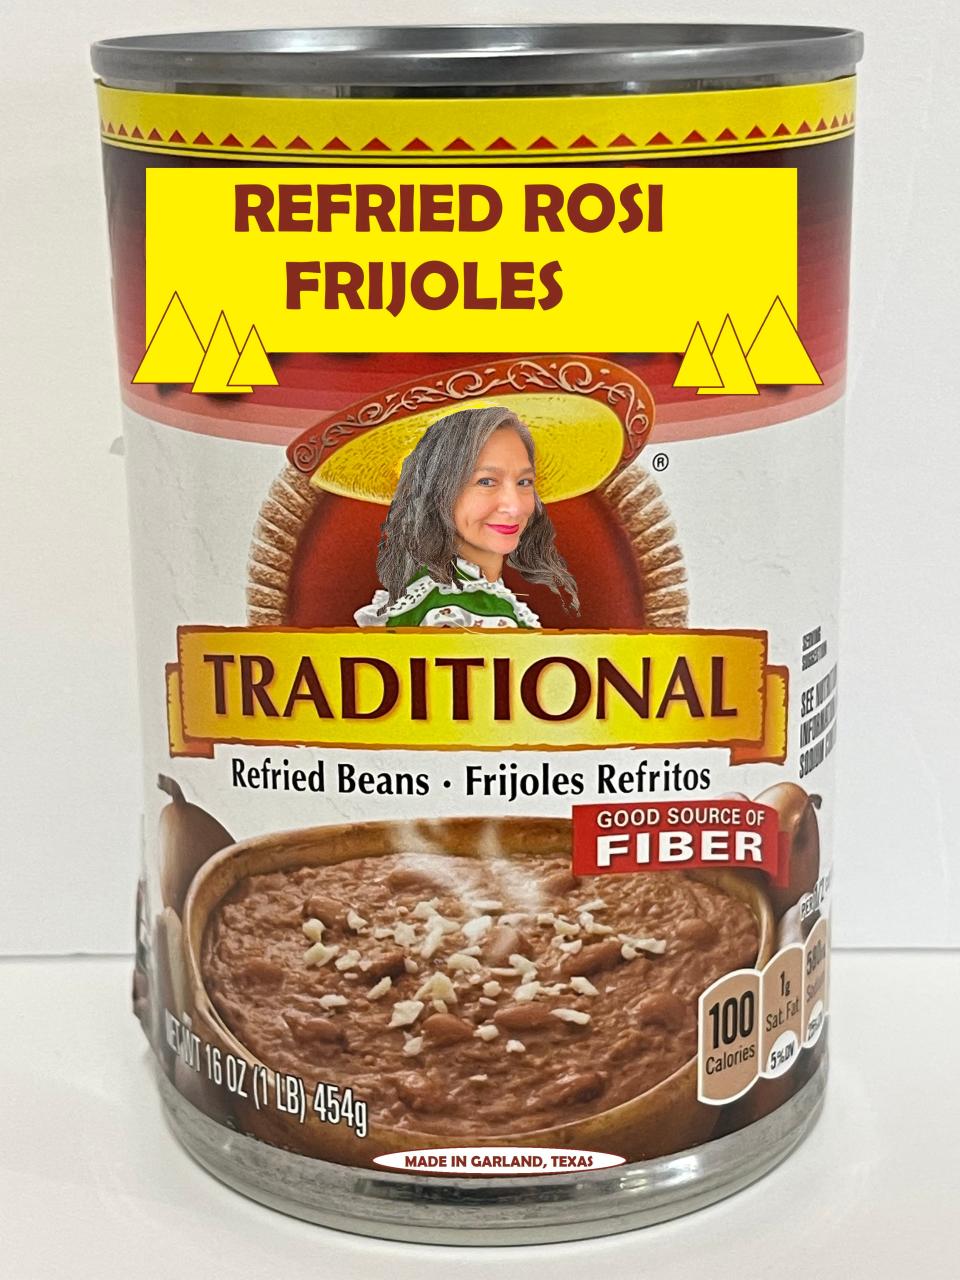 This digitally manipulated image of a can of beans features a likeness of Refried Rosi Frijoles, the main character in a satirical performance art piece that will be performed this fall by Farmington artist Rosemary Meza-DesPlas.